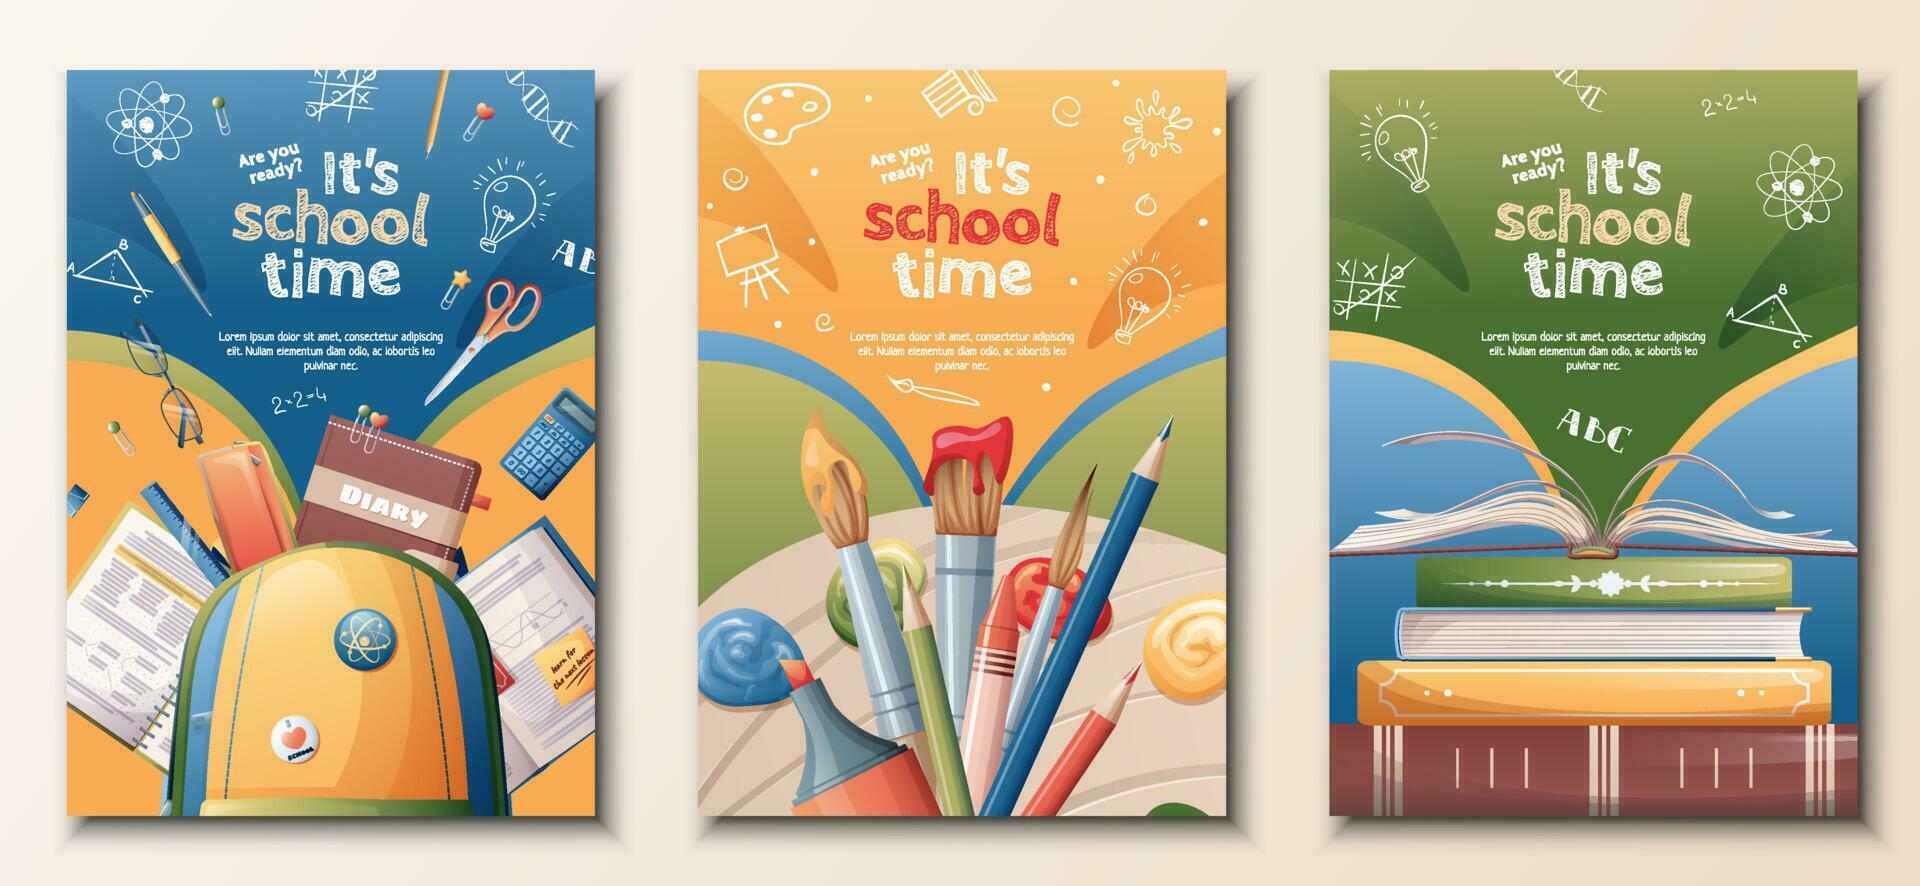 School banners set. Back to school, knowledge, education. Posters with school textbooks, books, backpack, paints. Vector set of a4 size flyers.